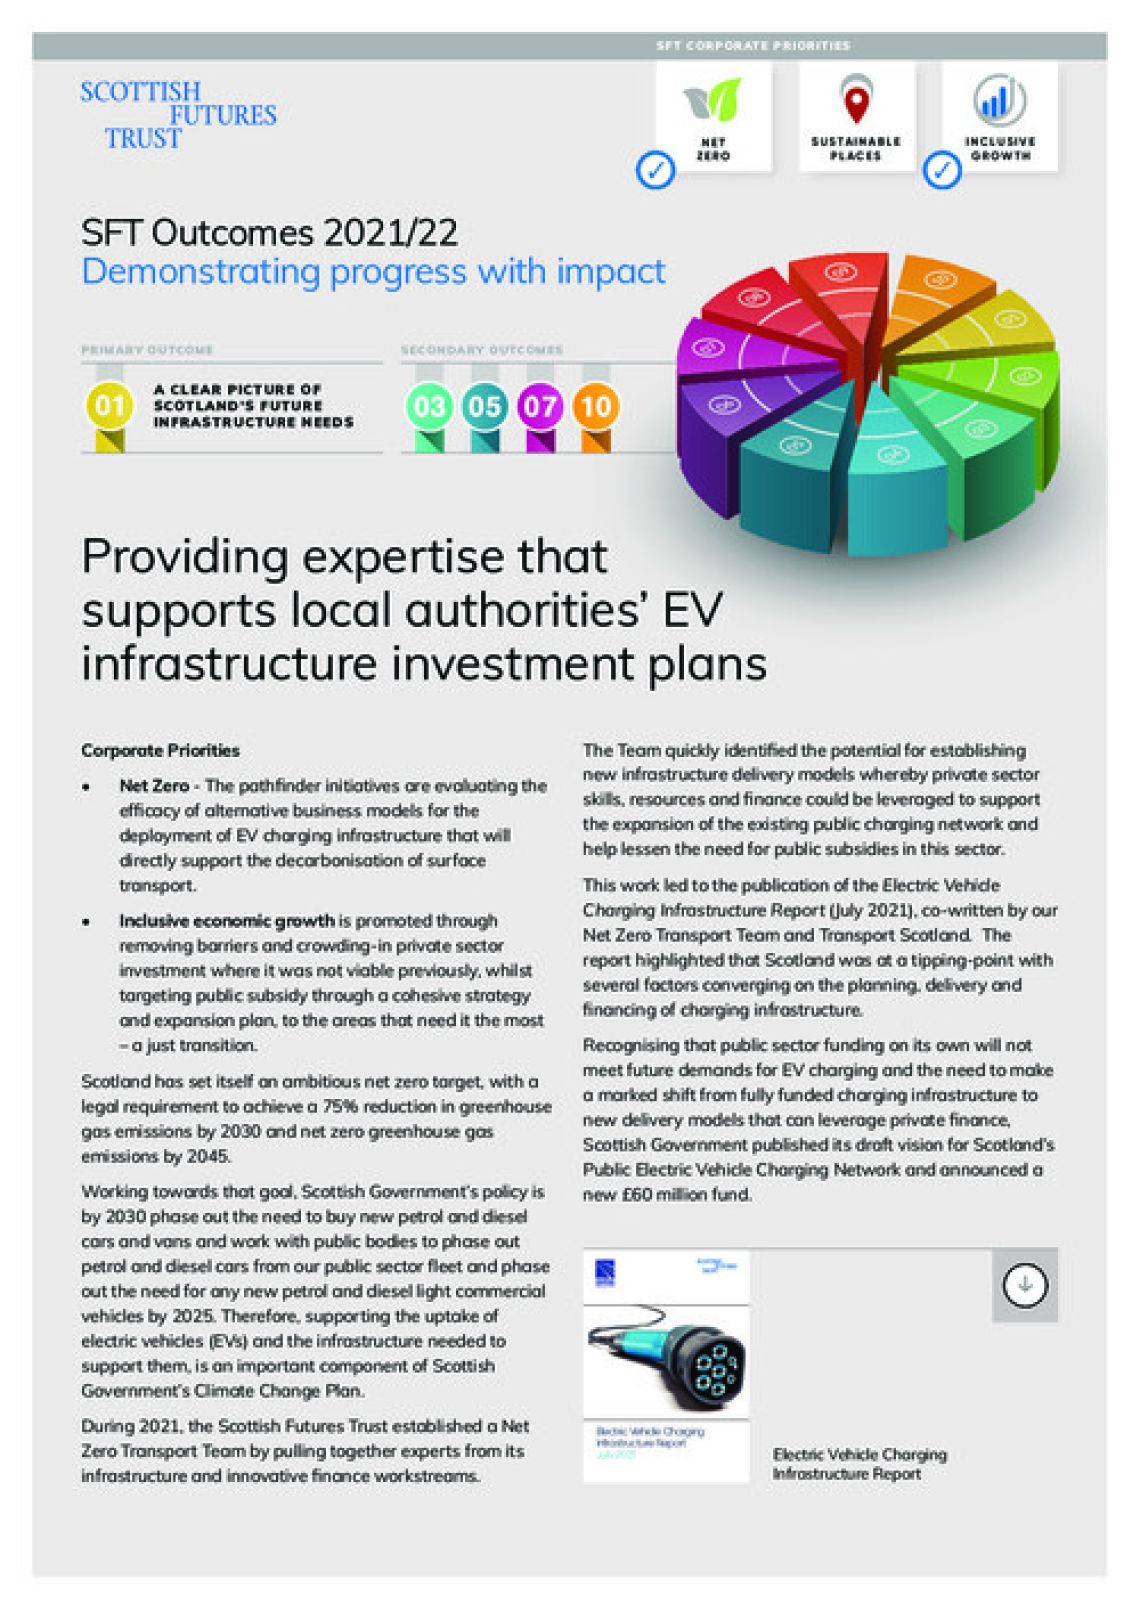 Providing expertise that supports local authorities’ EV infrastructure investment plans cover